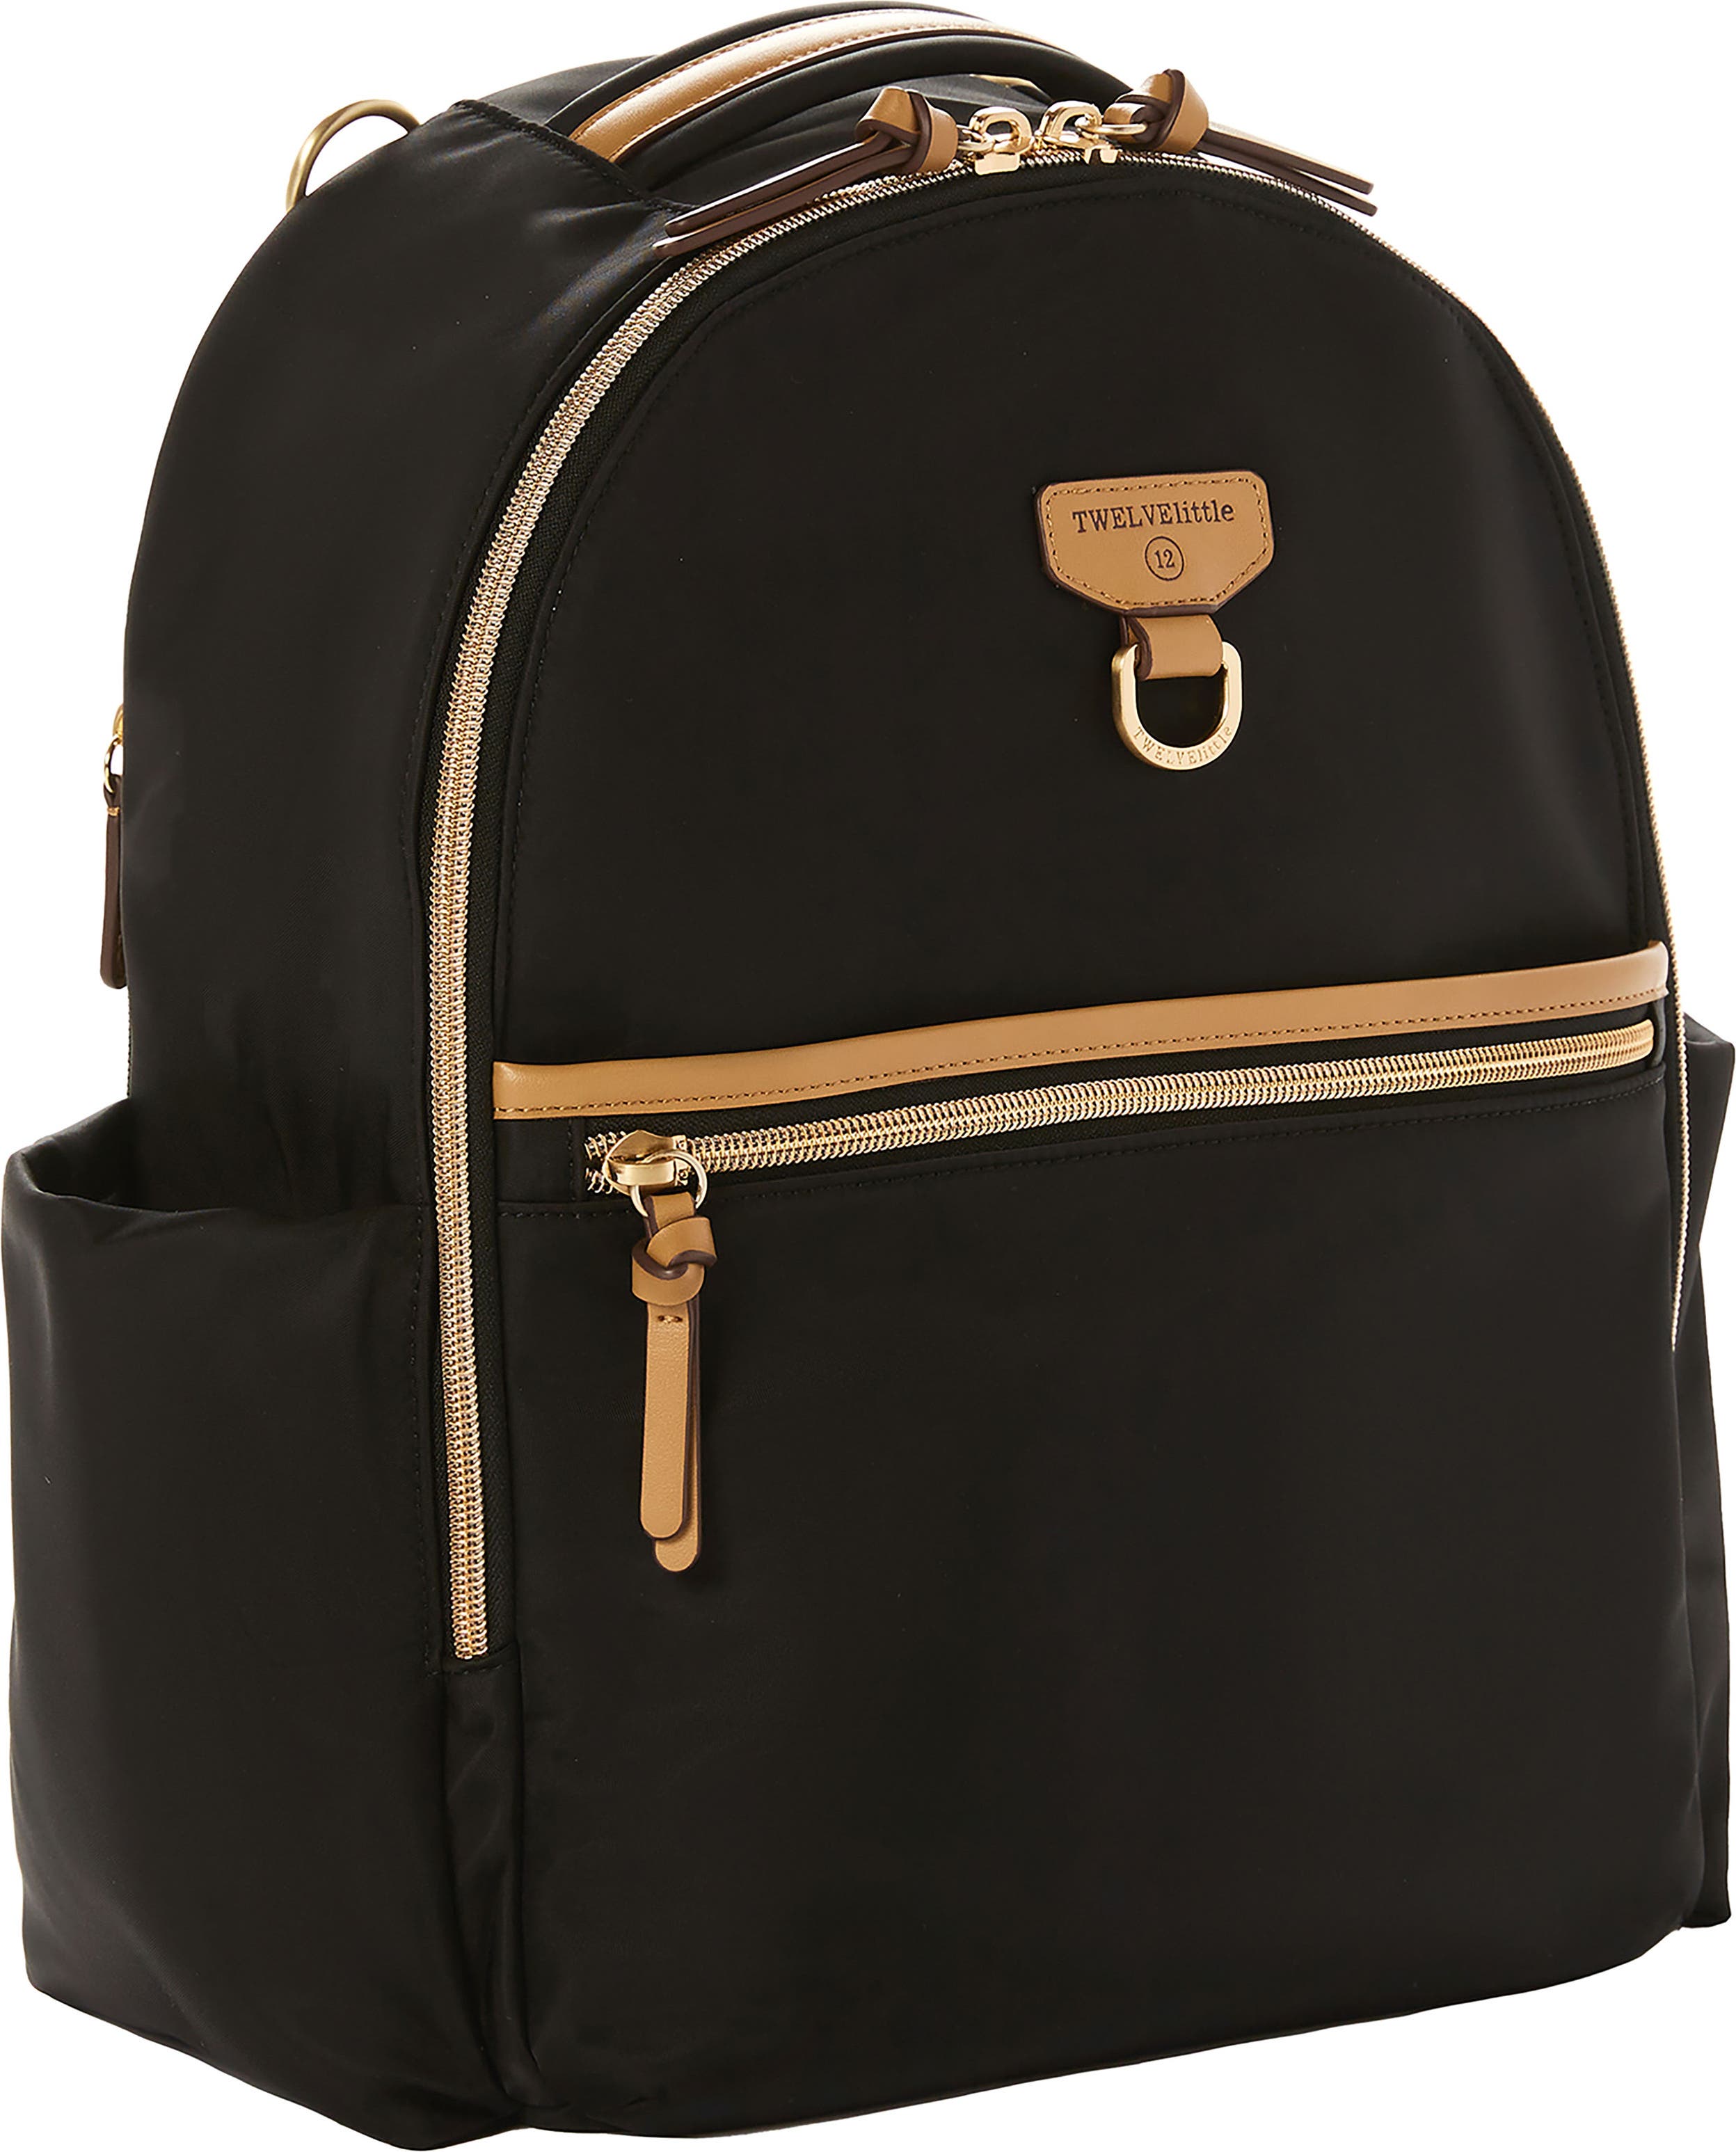 FB Jewels Solid Black Leather Organizer Backpack 